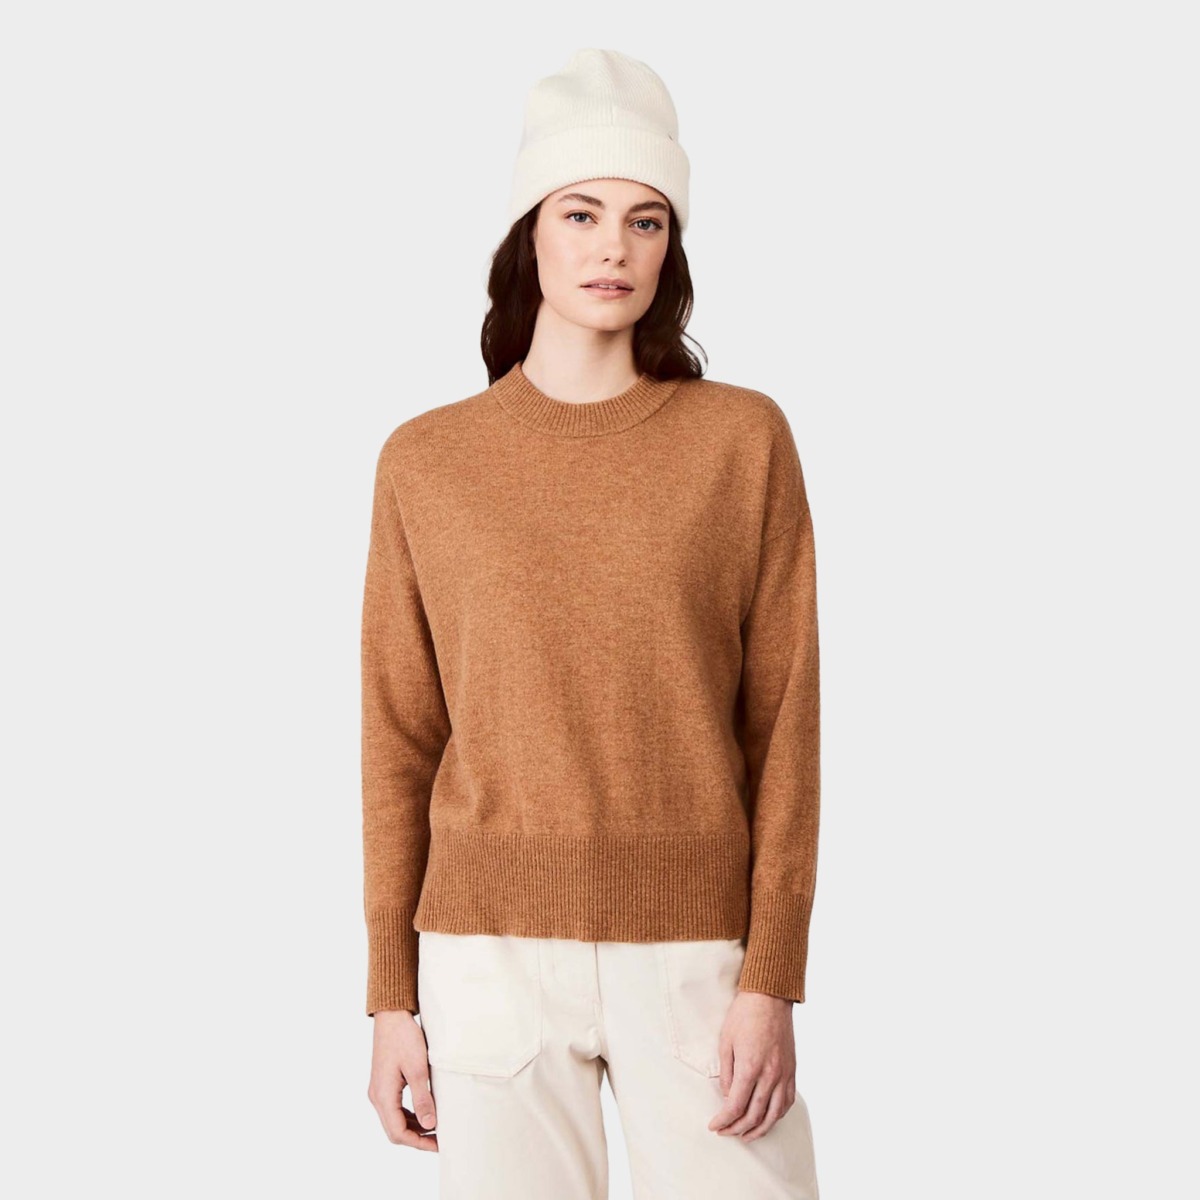 Sweater in Camel for Women at Tilley GOOFASH